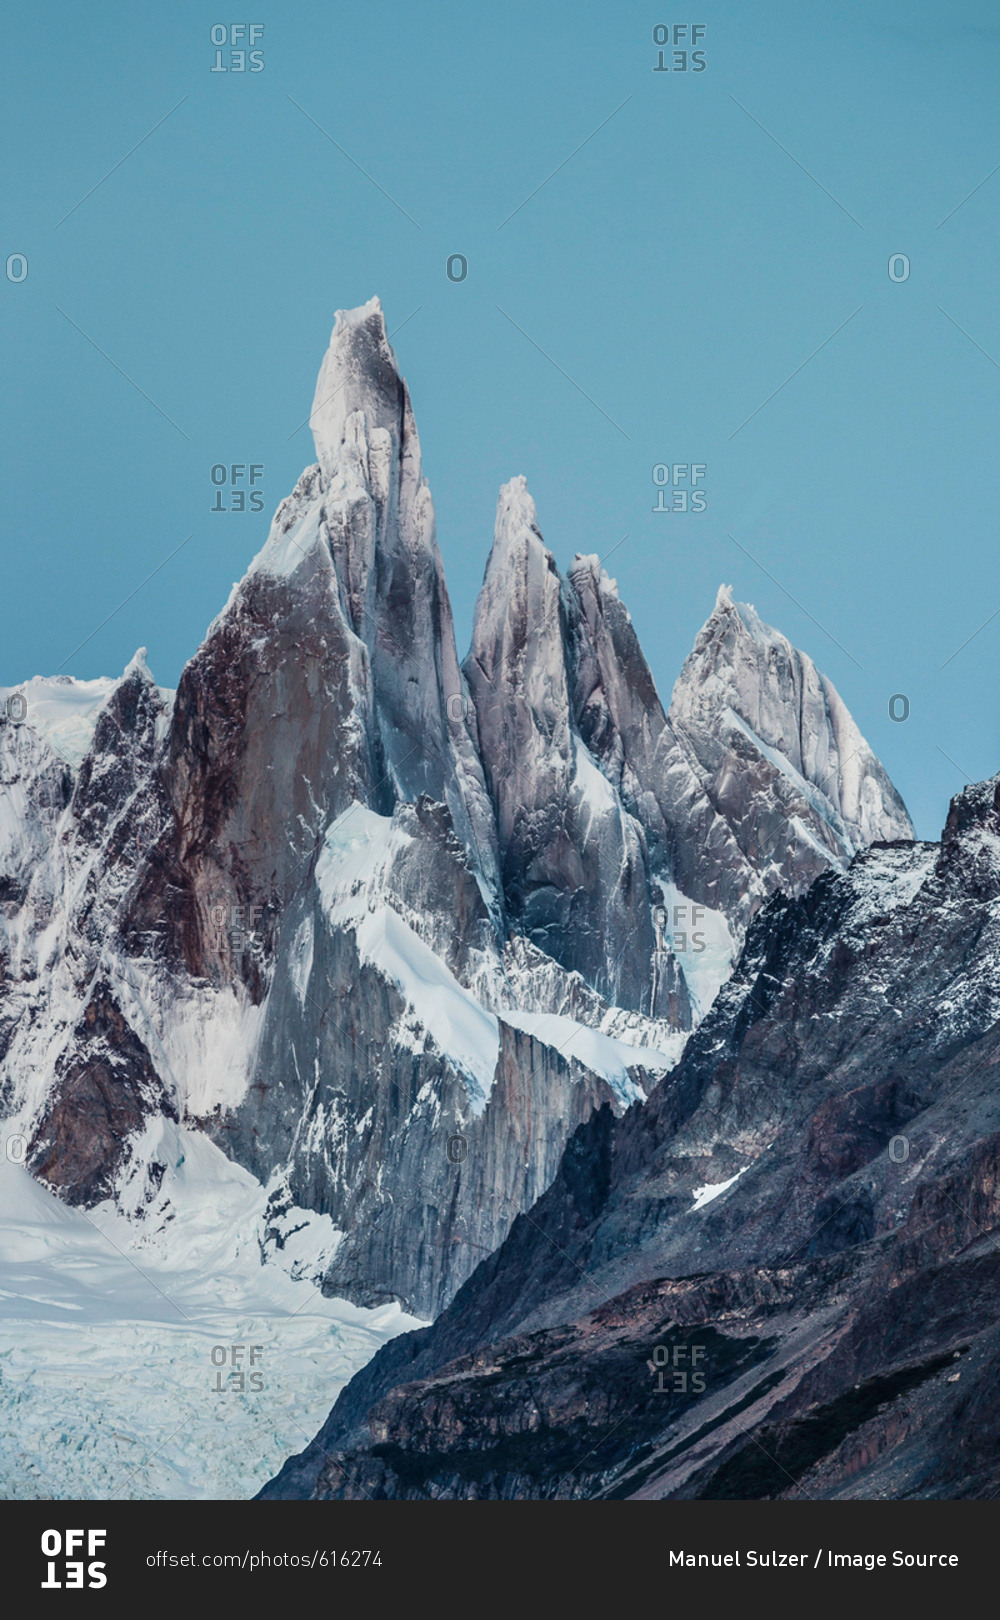 Blue sky over Cerro Torre and Fitz Roy mountain ranges, Los Glaciares National Park, Patagonia, Argentina